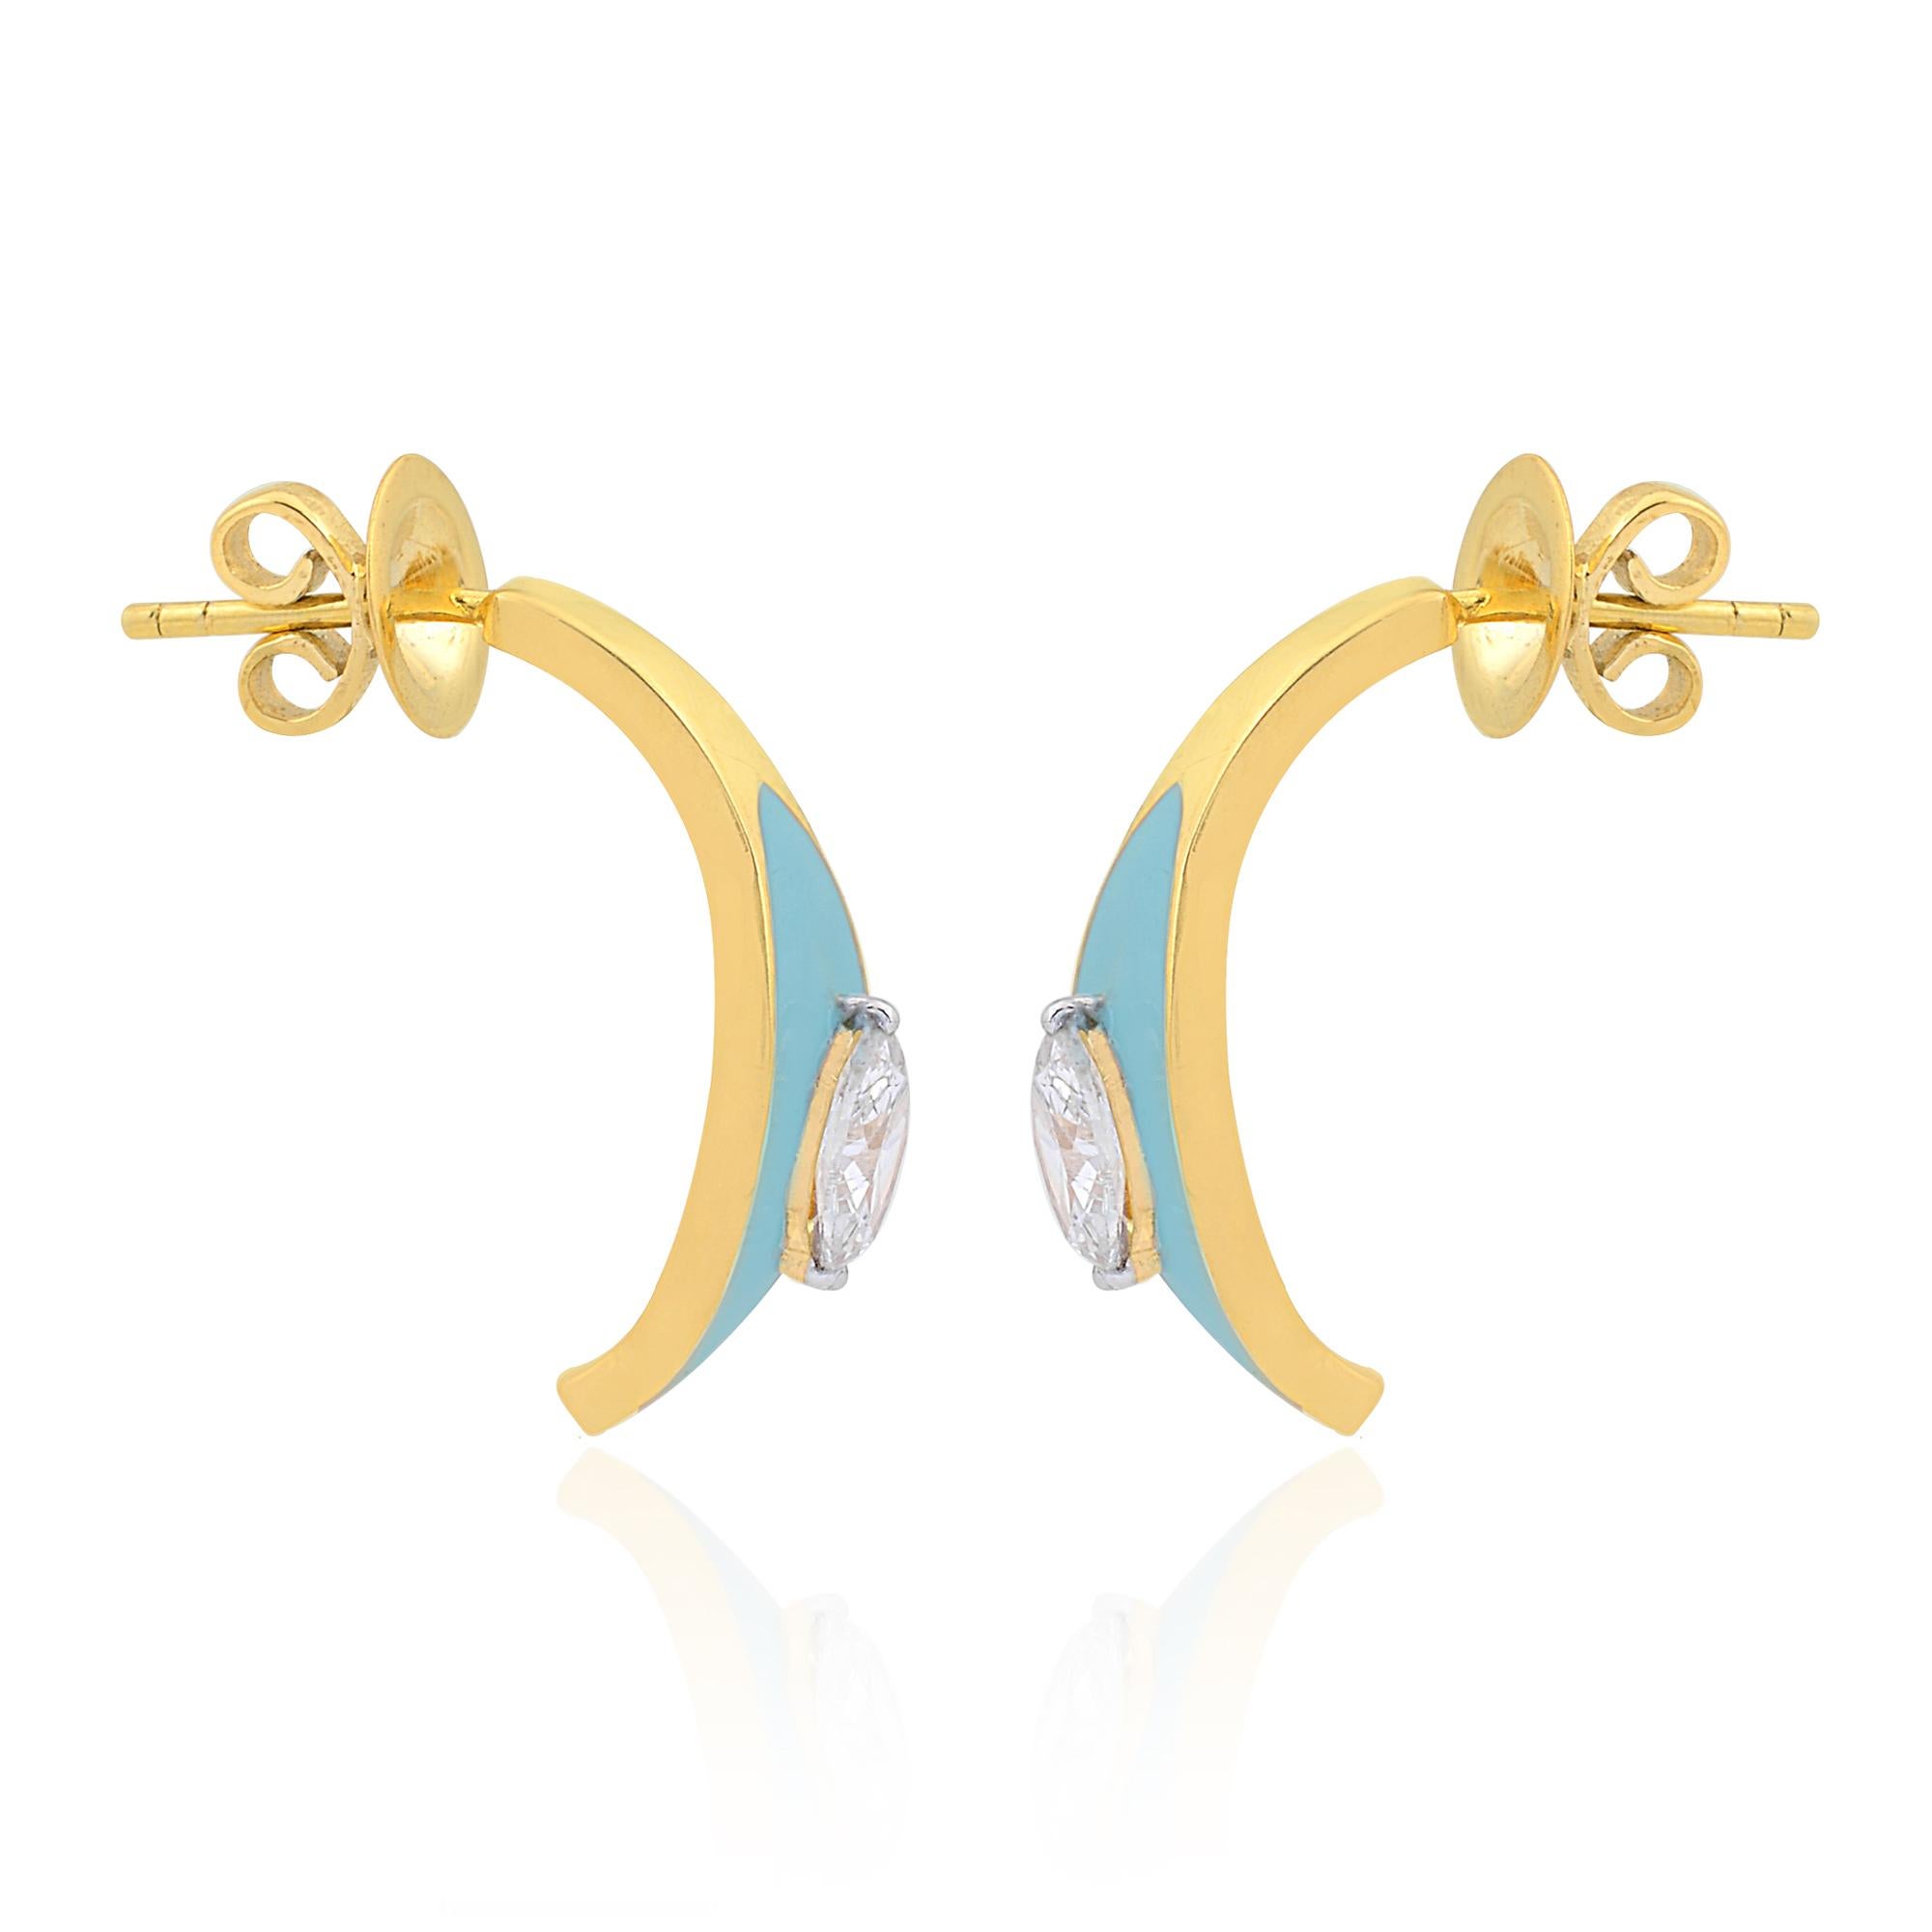 Adorn yourself with elegance and sophistication with these stunning 0.75 Carat Marquise Diamond Turquoise Enamel Half Hoop Earrings in 14k Yellow Gold. Crafted with meticulous attention to detail, these earrings seamlessly blend classic allure with